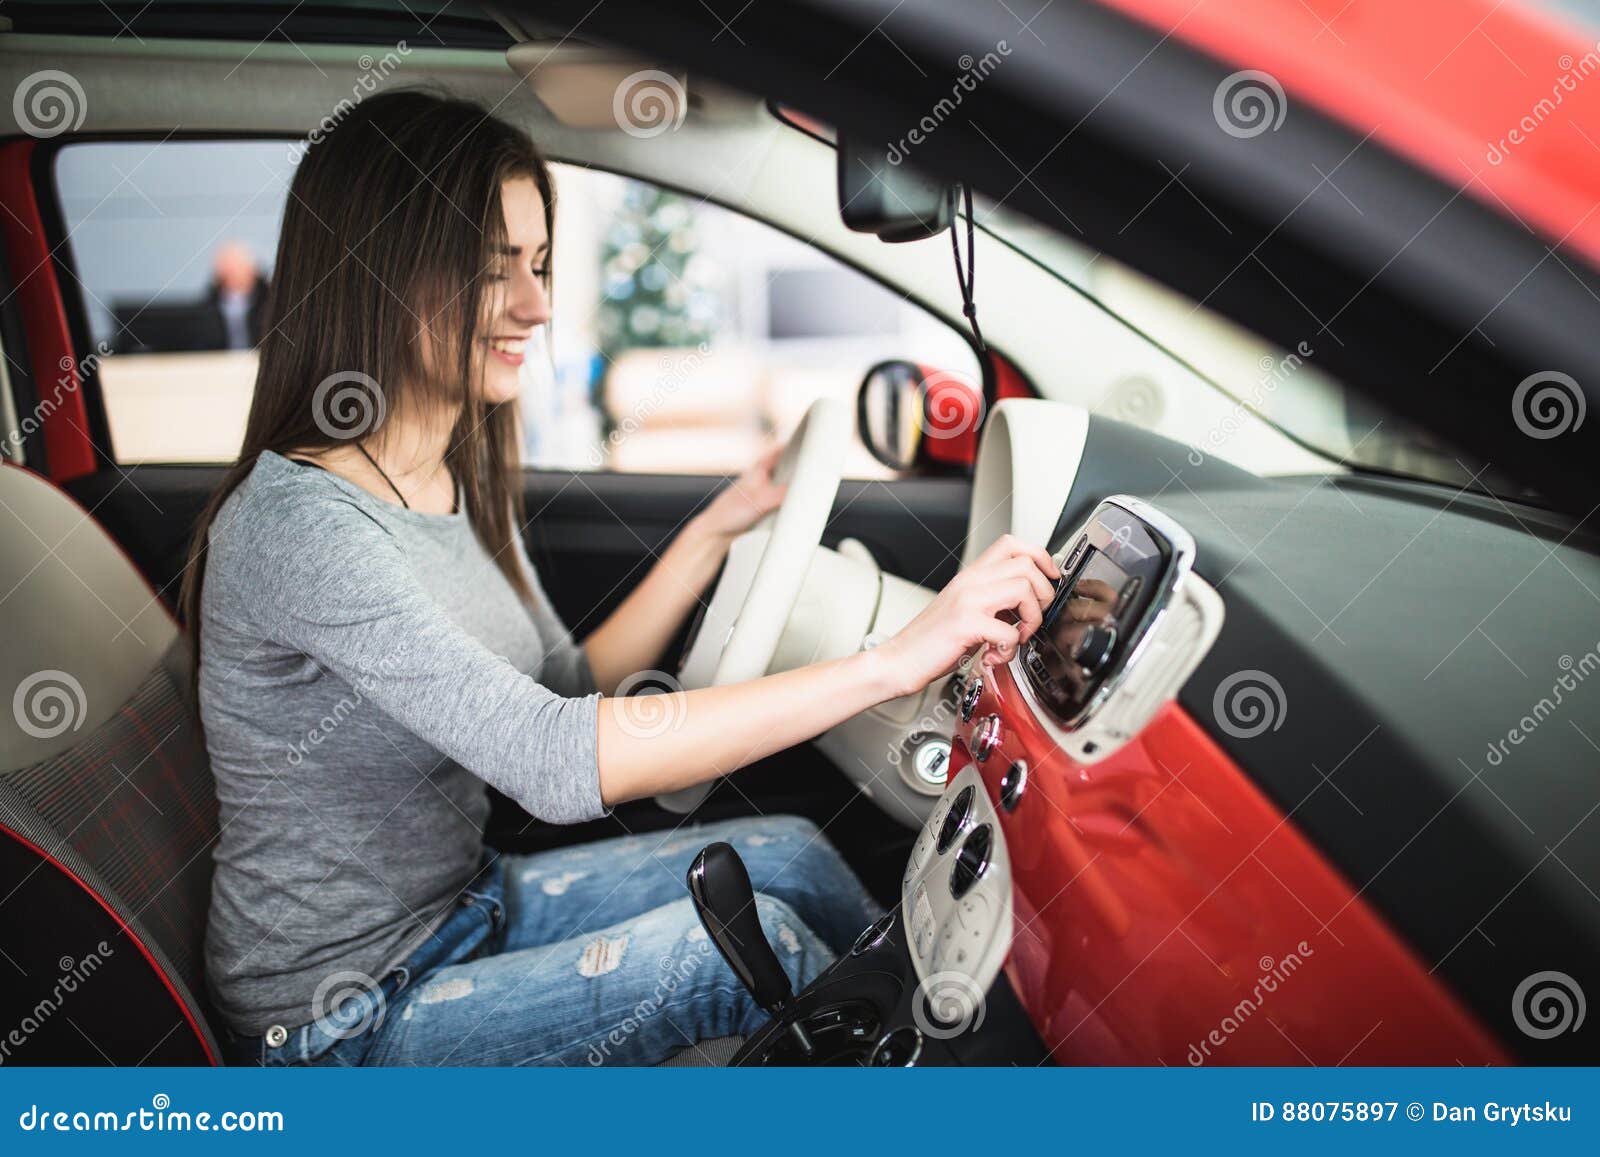 Woman Turning Button Of Radio In Car Stock Photo - Download Image